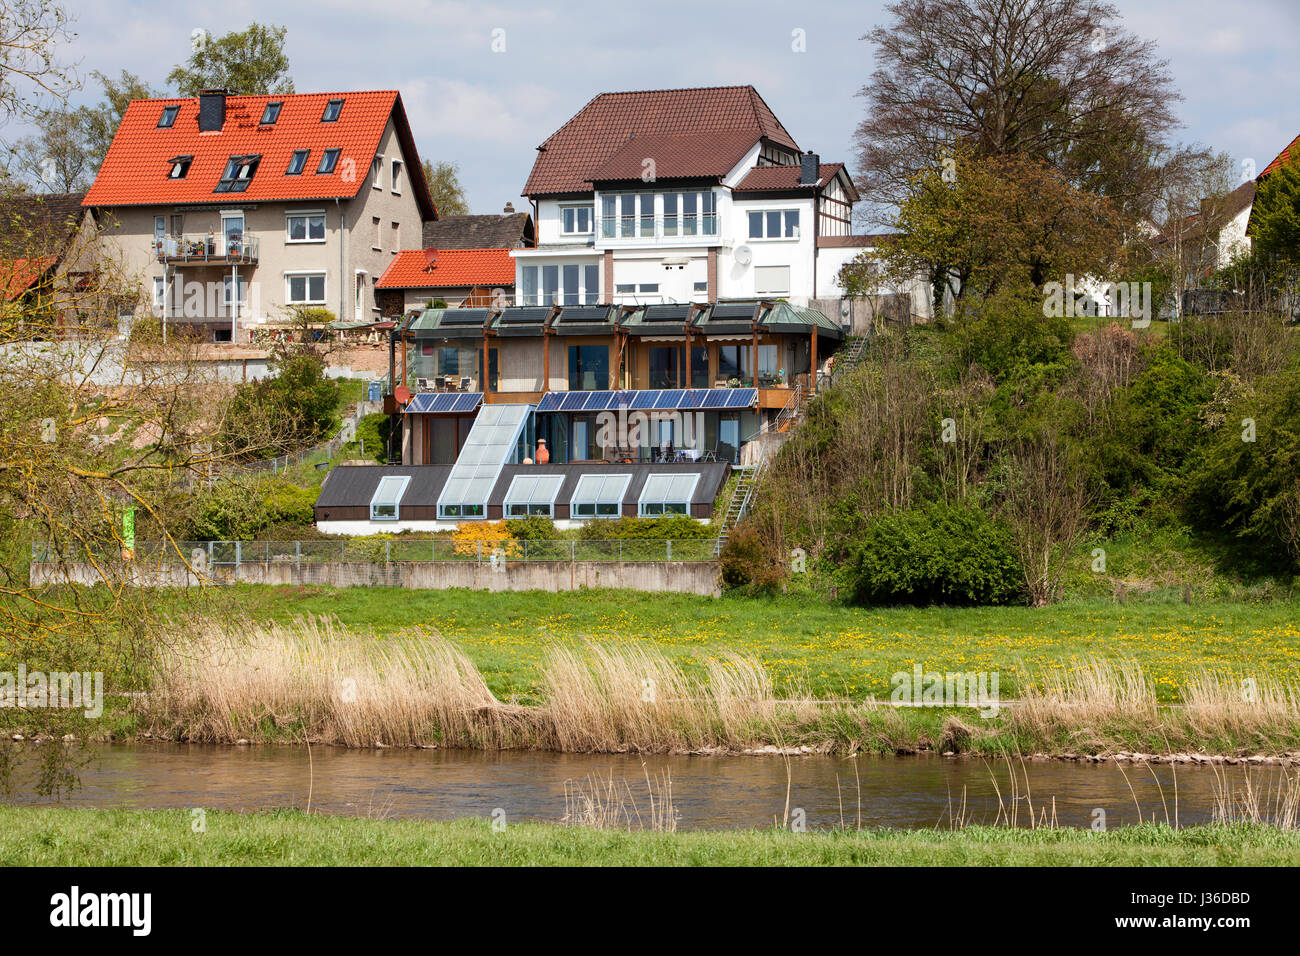 Rear of the houses on the banks of the River Weser, Bodenfelde, district of Northeim, Lower Saxony, Germany Stock Photo